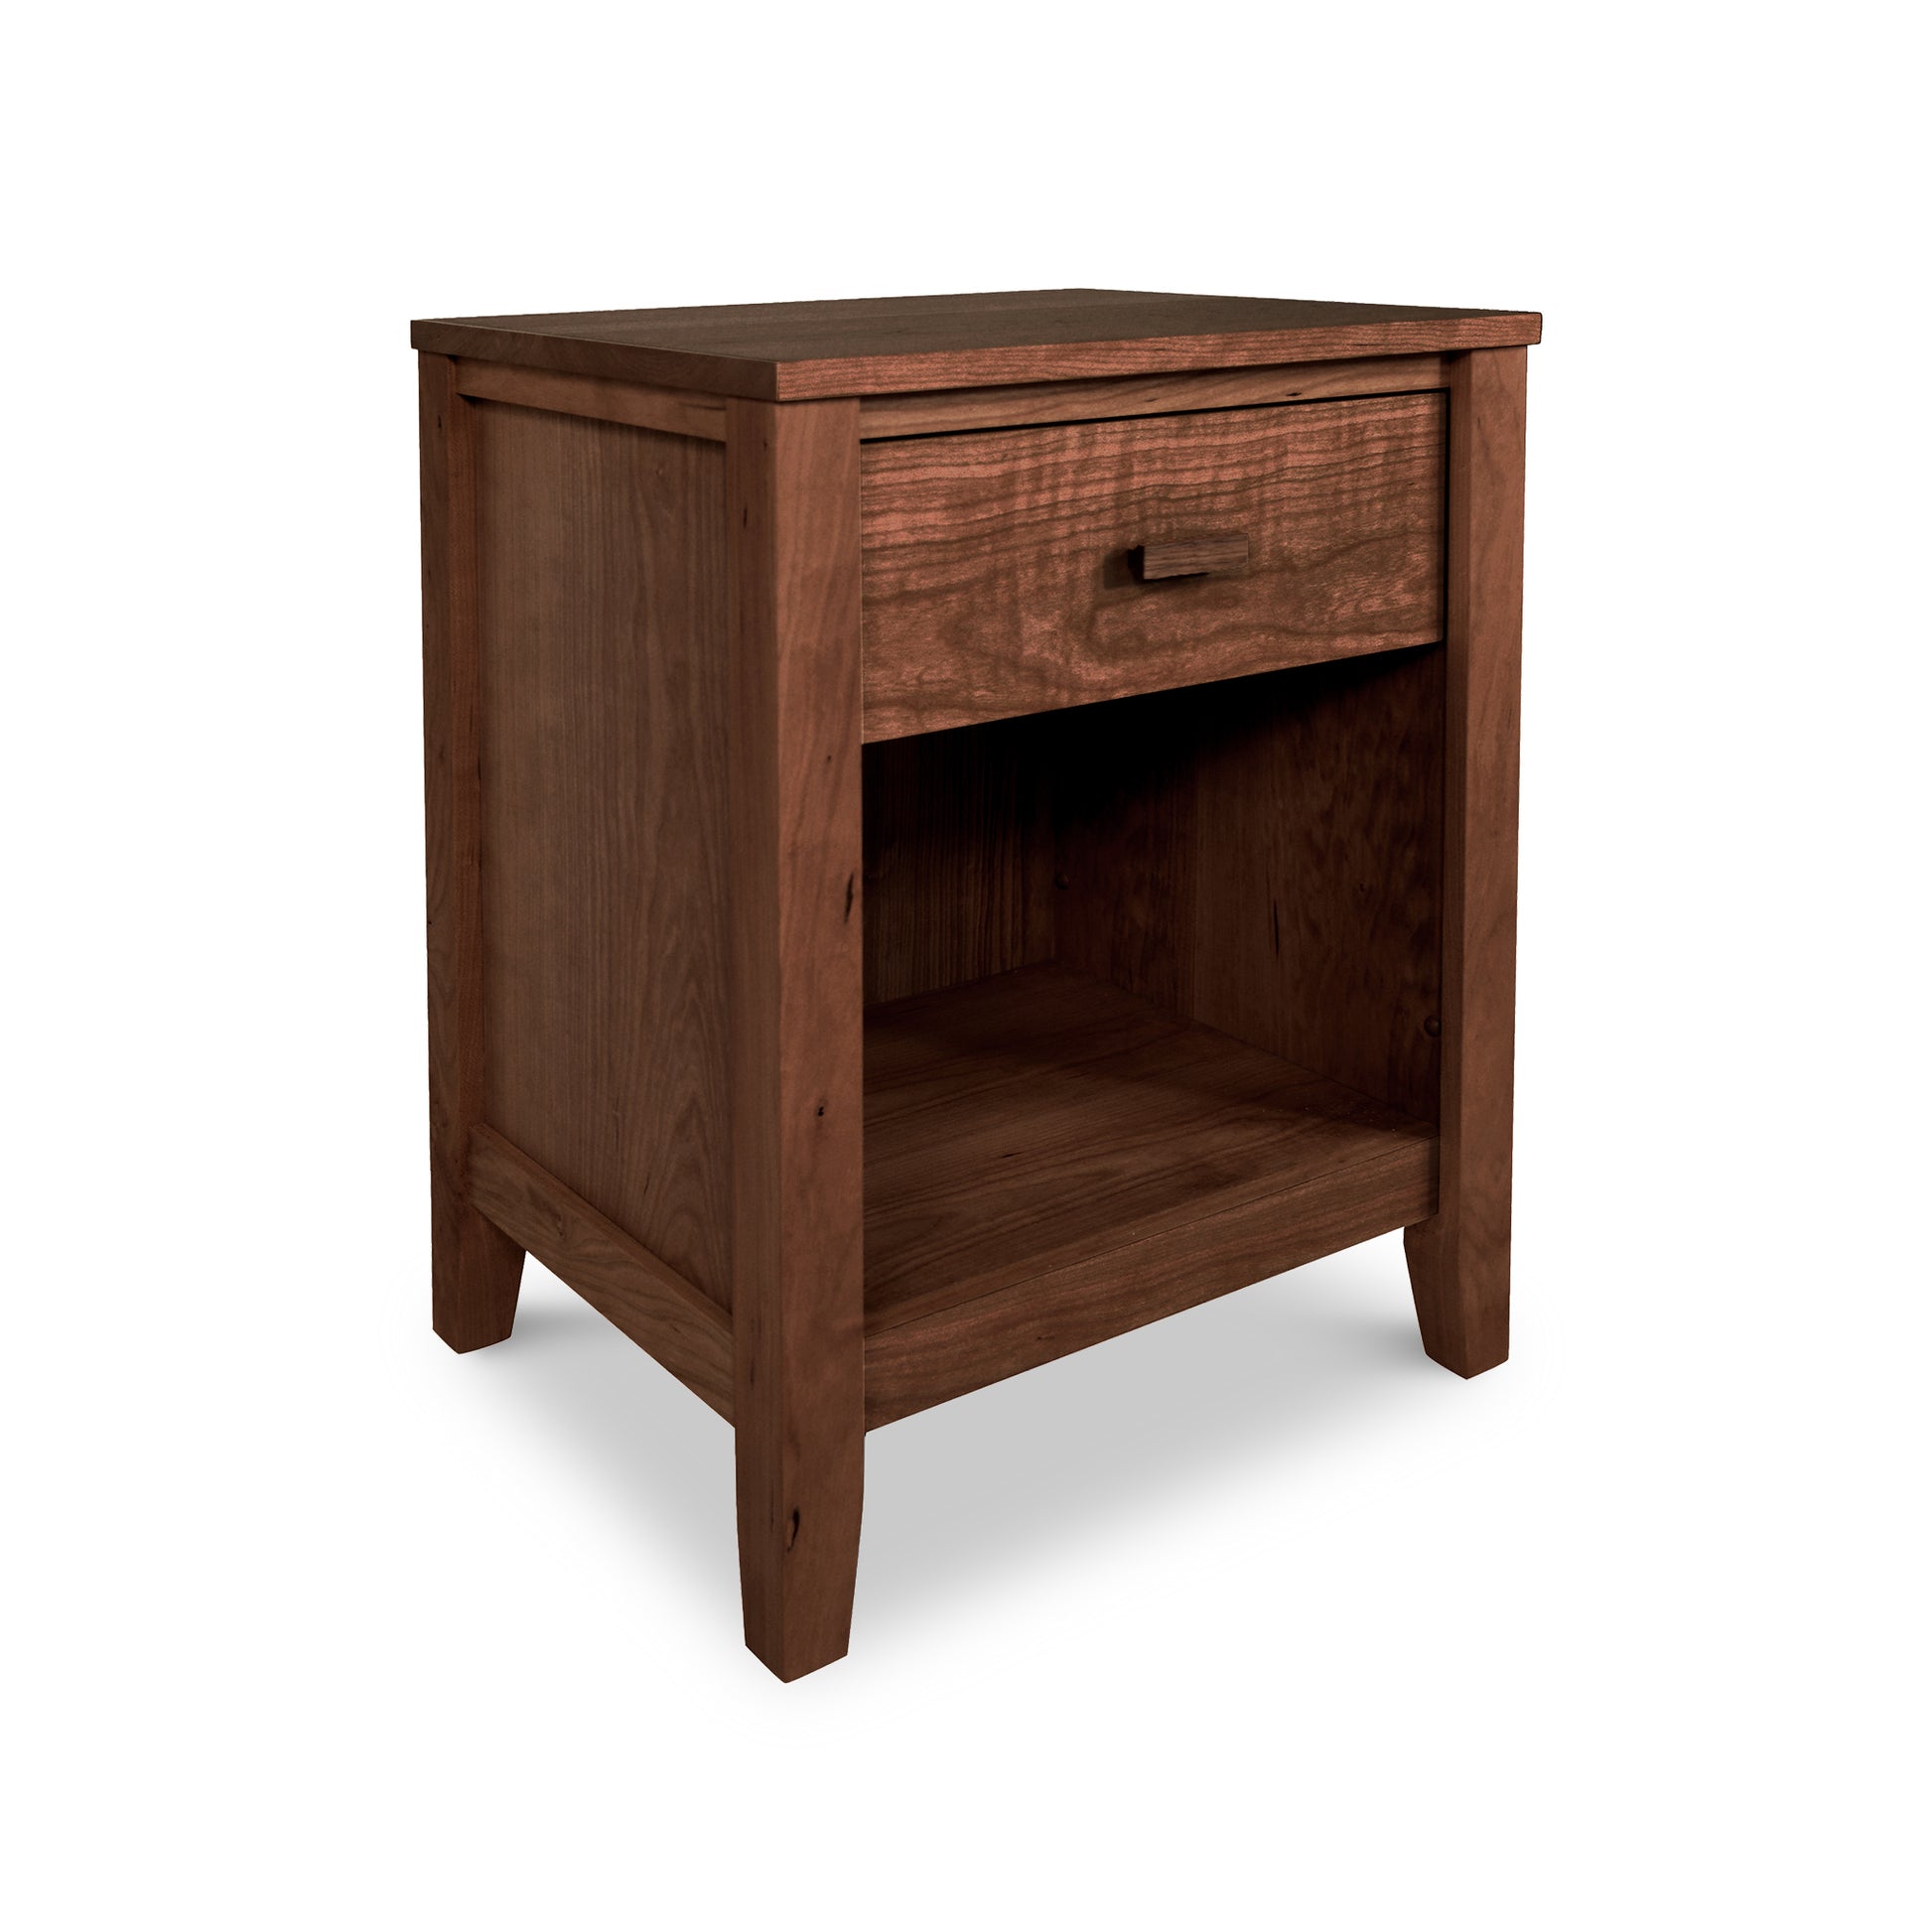 A Maple Corner Woodworks Andover Modern 1-Drawer Enclosed Shelf Nightstand crafted in Vermont, featuring a single drawer and an open shelf below, isolated on a white background. The furniture is made of dark-stained wood with visible grain texture from sustainably harvested sources.